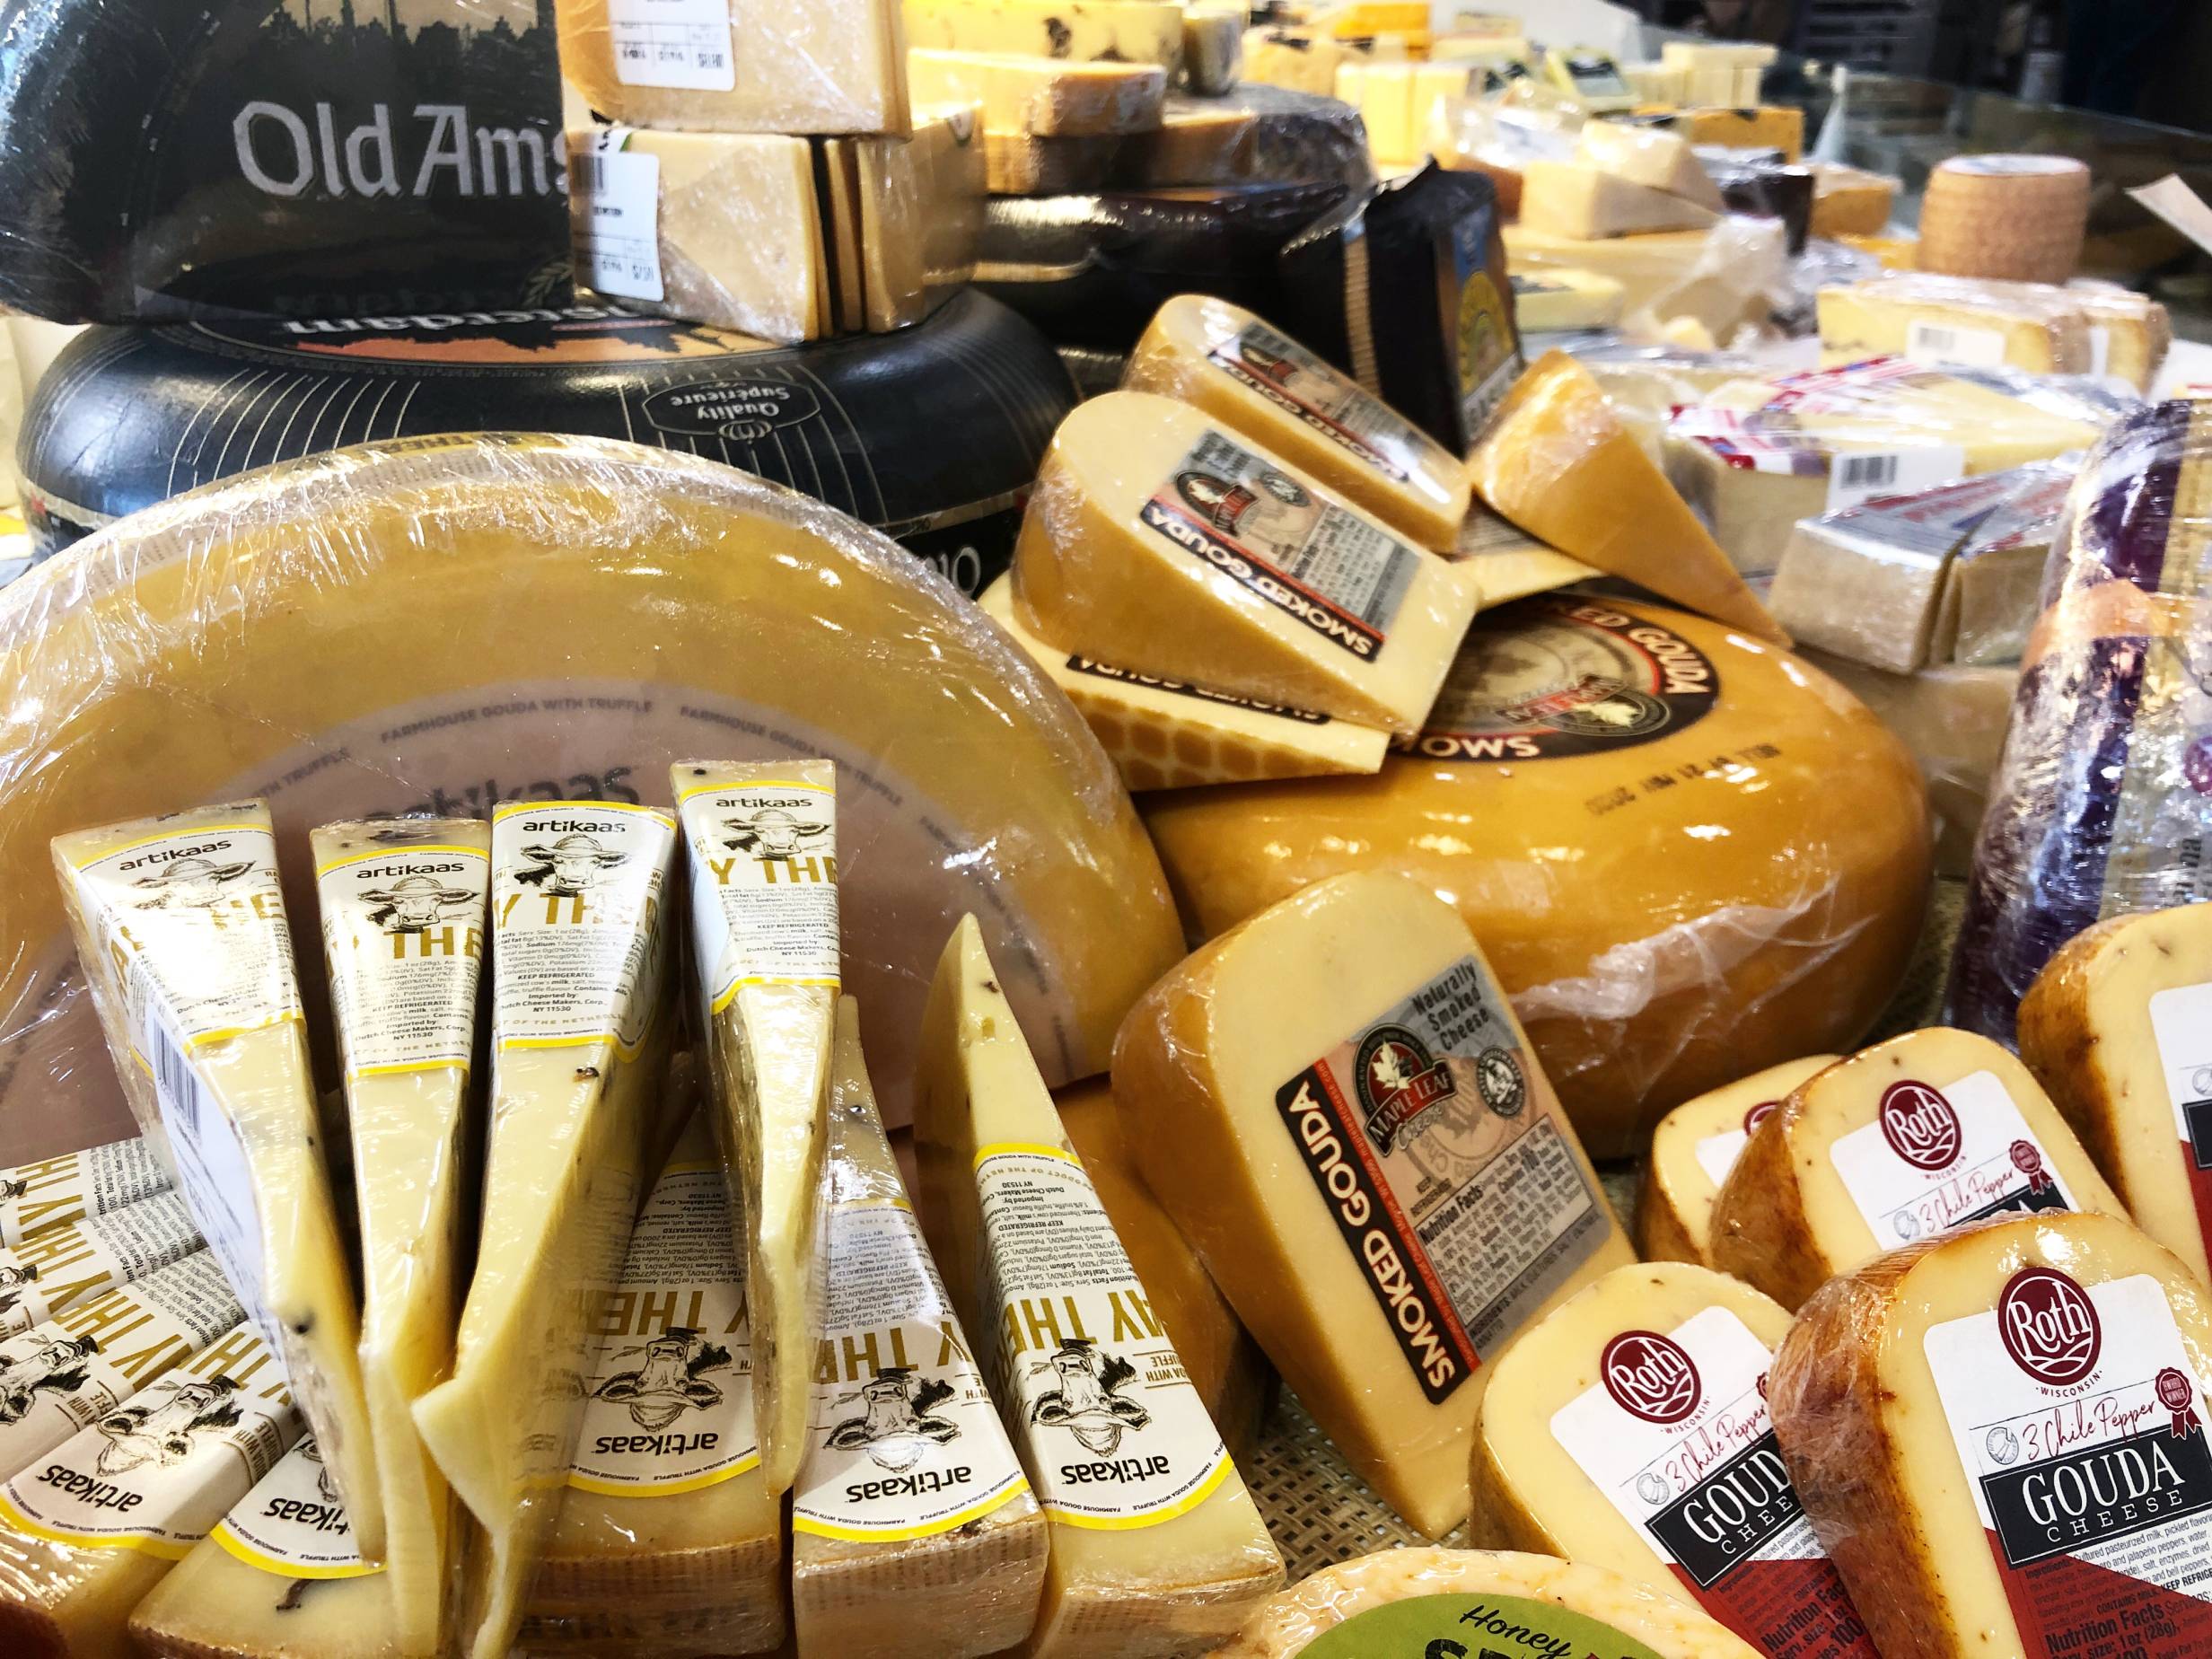 A close up of the gouda cheese section. There are several skinny wedges of cheese, a few wheels of cheese, and a collection of gouda cheese in the bottom right. Photo by Alyssa Buckley.